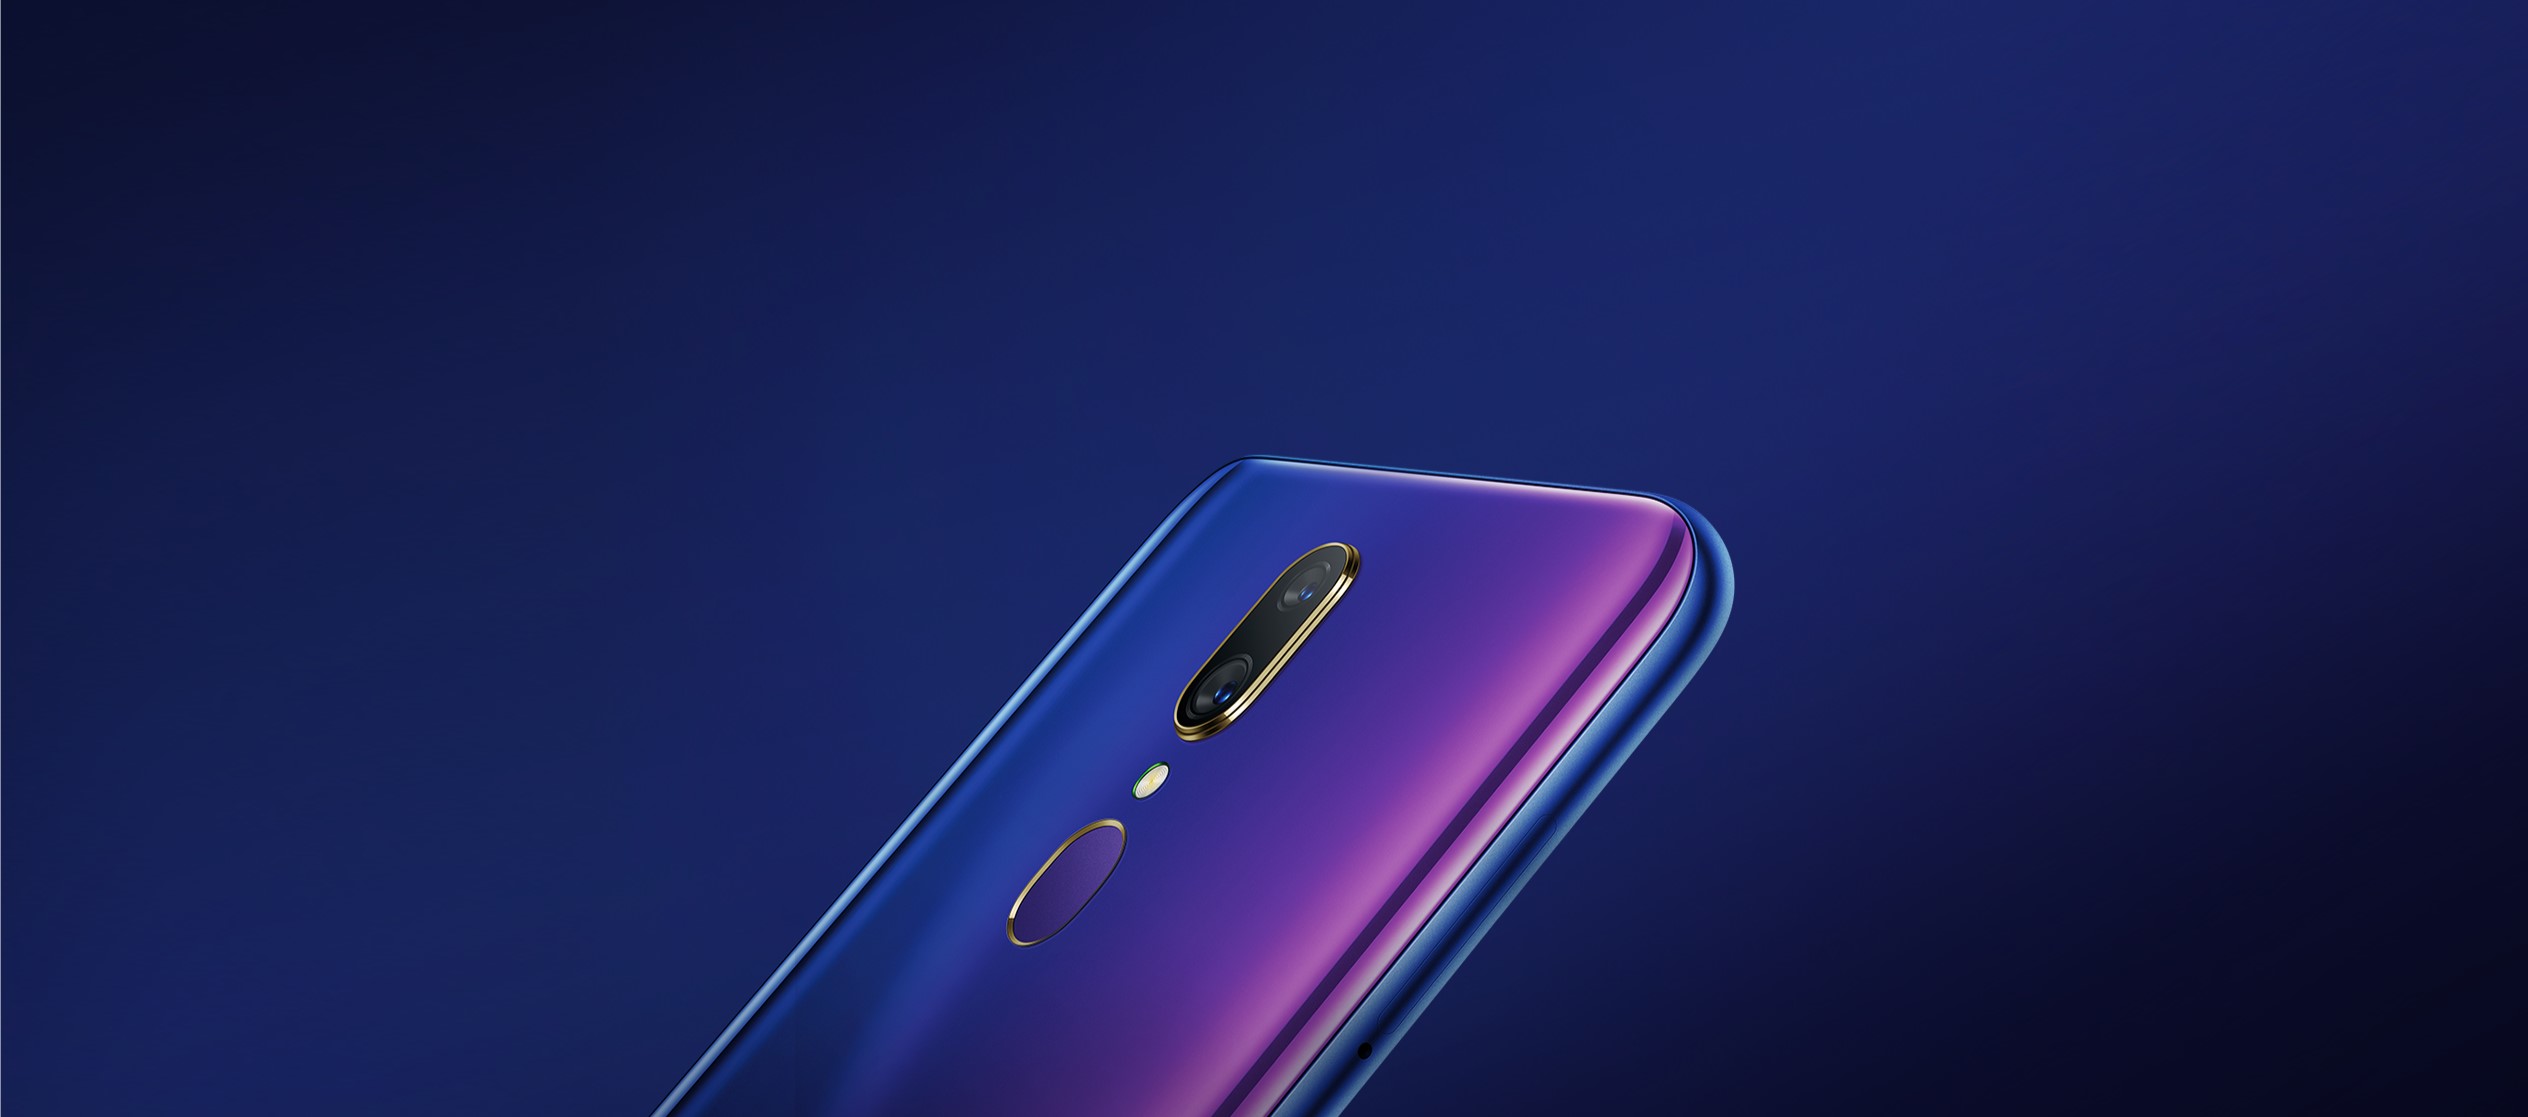 OPPO A9 16MP AI Dual Lens Camera "width =" 2528 "height =" 1117 "srcset =" https://assets.mspimages.in/gear/wp-content/uploads/2019/07/OPPO-A9-16MP-AI -Dual-Lens-Camera.jpg 2528w, https://assets.mspimages.in/gear/wp-content/uploads/2019/07/OPPO-A9-16MP-AI-Dual-Lens-Camera-300x133.jpg 300w , https://assets.mspimages.in/gear/wp-content/uploads/2019/07/OPPO-A9-16MP-AI-Dual-Lens-Camera-768x339.jpg 768w, https: //assets.mspimages. in / gear / wp-content / uploads / 2019/07 / OPPO-A9-16MP-AI-Dual-Lens-Camera-1024x452.jpg 1024w, https://assets.mspimages.in/gear/wp-content/uploads /2019/07/OPPO-A9-16MP-AI-Dual-Lens-Camera-696x308.jpg 696w, https://assets.mspimages.in/gear/wp-content/uploads/2019/07/OPPO-A9- 16MP-AI-Dual-Lens-Camera-1068x472.jpg 1068w, https://assets.mspimages.in/gear/wp-content/uploads/2019/07/OPPO-A9-16MP-AI-Dual-Lens-Camera -951x420.jpg 951w, https://assets.mspimages.in/gear/wp-content/uploads/2019/07/OPPO-A9-16MP-AI-Dual-Lens-Camera-50x22.jpg 50w "ukuran =" (lebar maks: 2528px) 100vw, 2528px